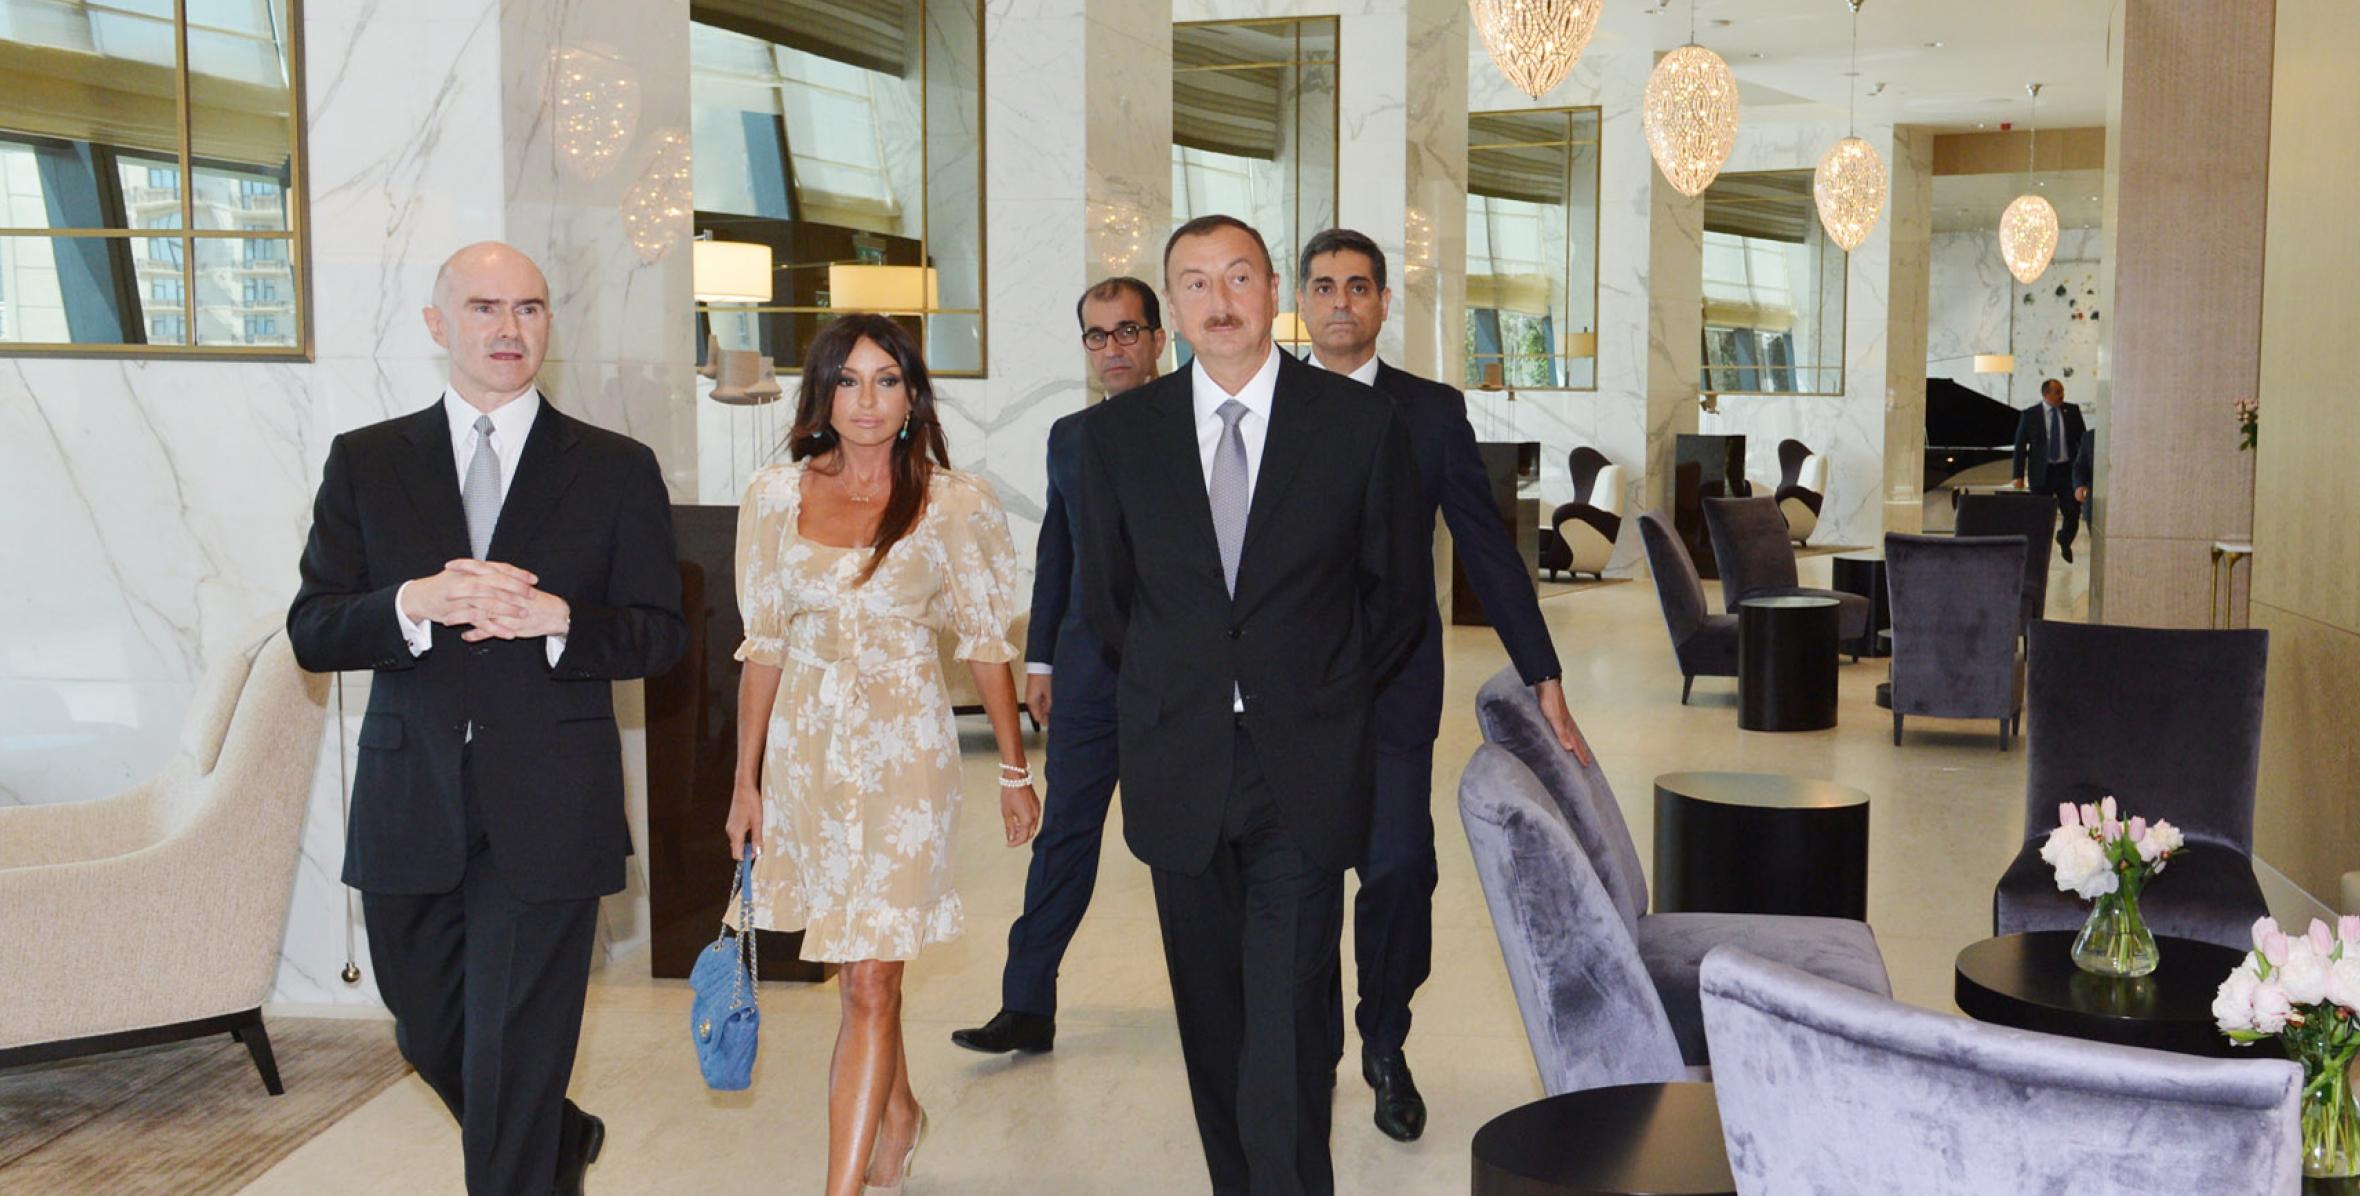 Ilham Aliyev attended the opening of the “Fairmont Baku Hotel” at the Flame Towers complex